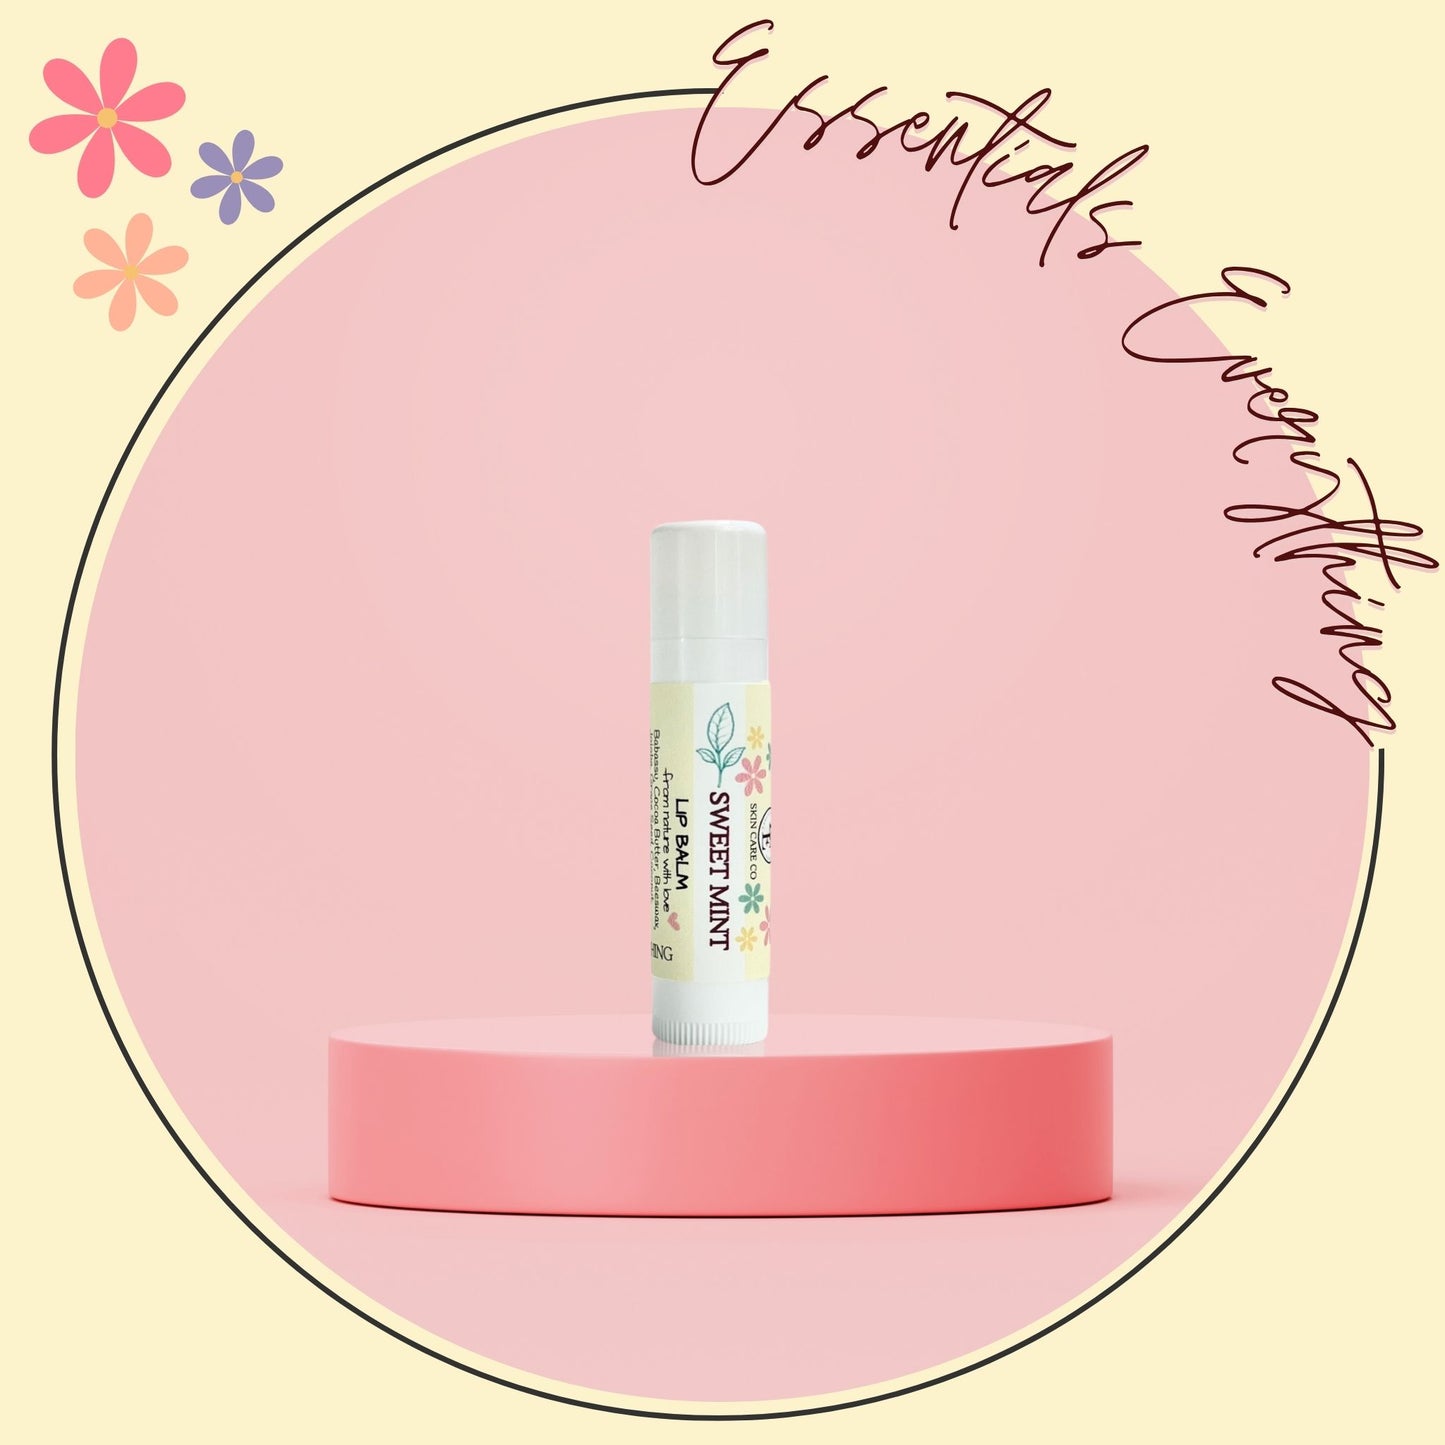 Sweet Mint - All Natural, Organic, Vegan and Cruelty-Free Lip Balm by Essentials Everything Skin Care Co. Form Nature with Love